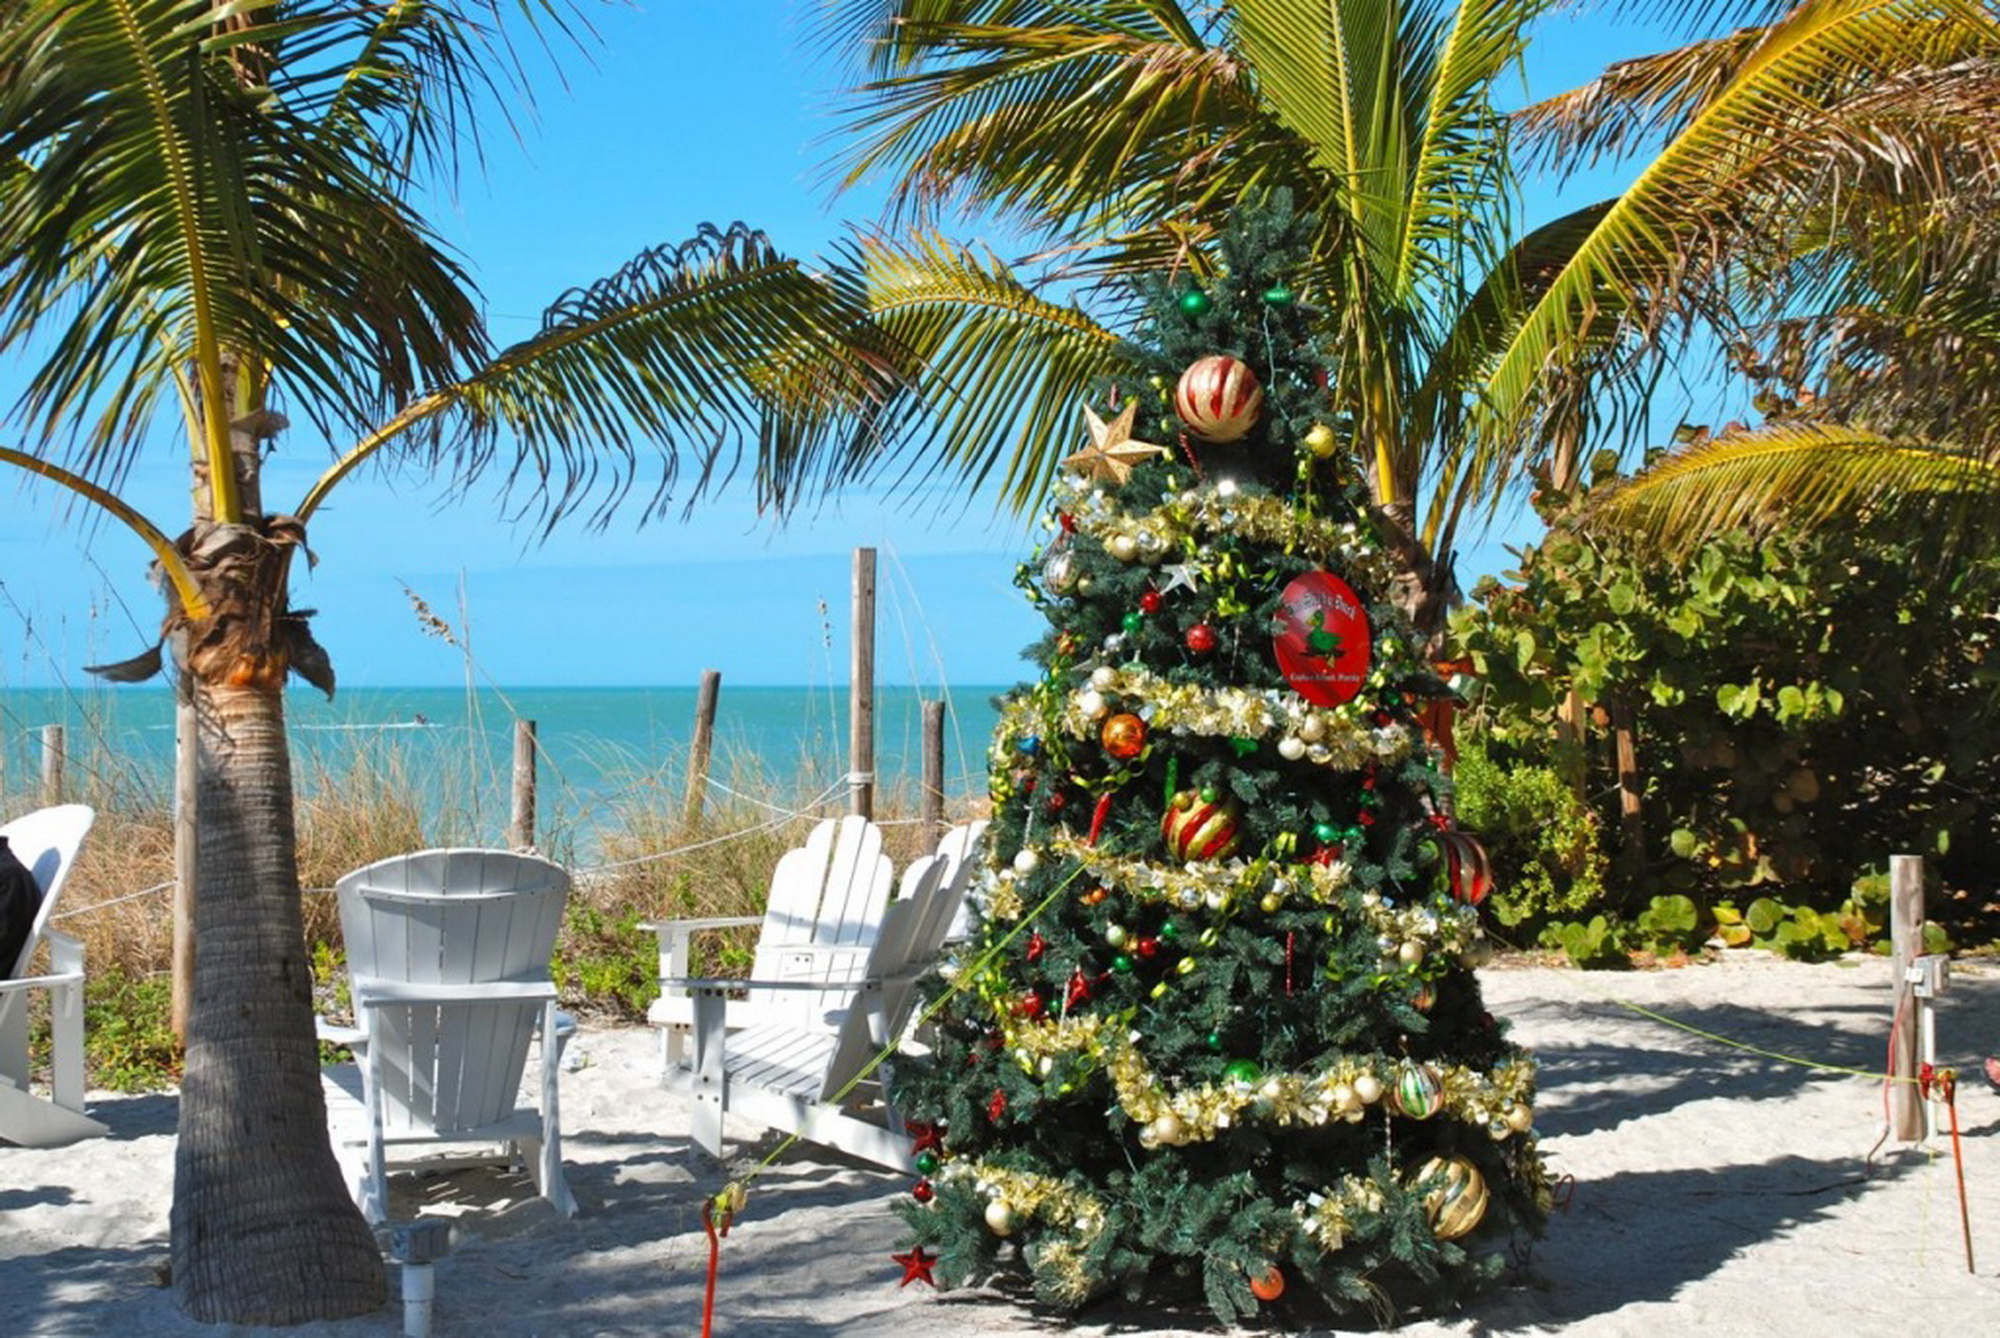 South Florida Vacation Rental Accommodations During The Holidays 11 AIRbnb South Florida Injury Law Firm